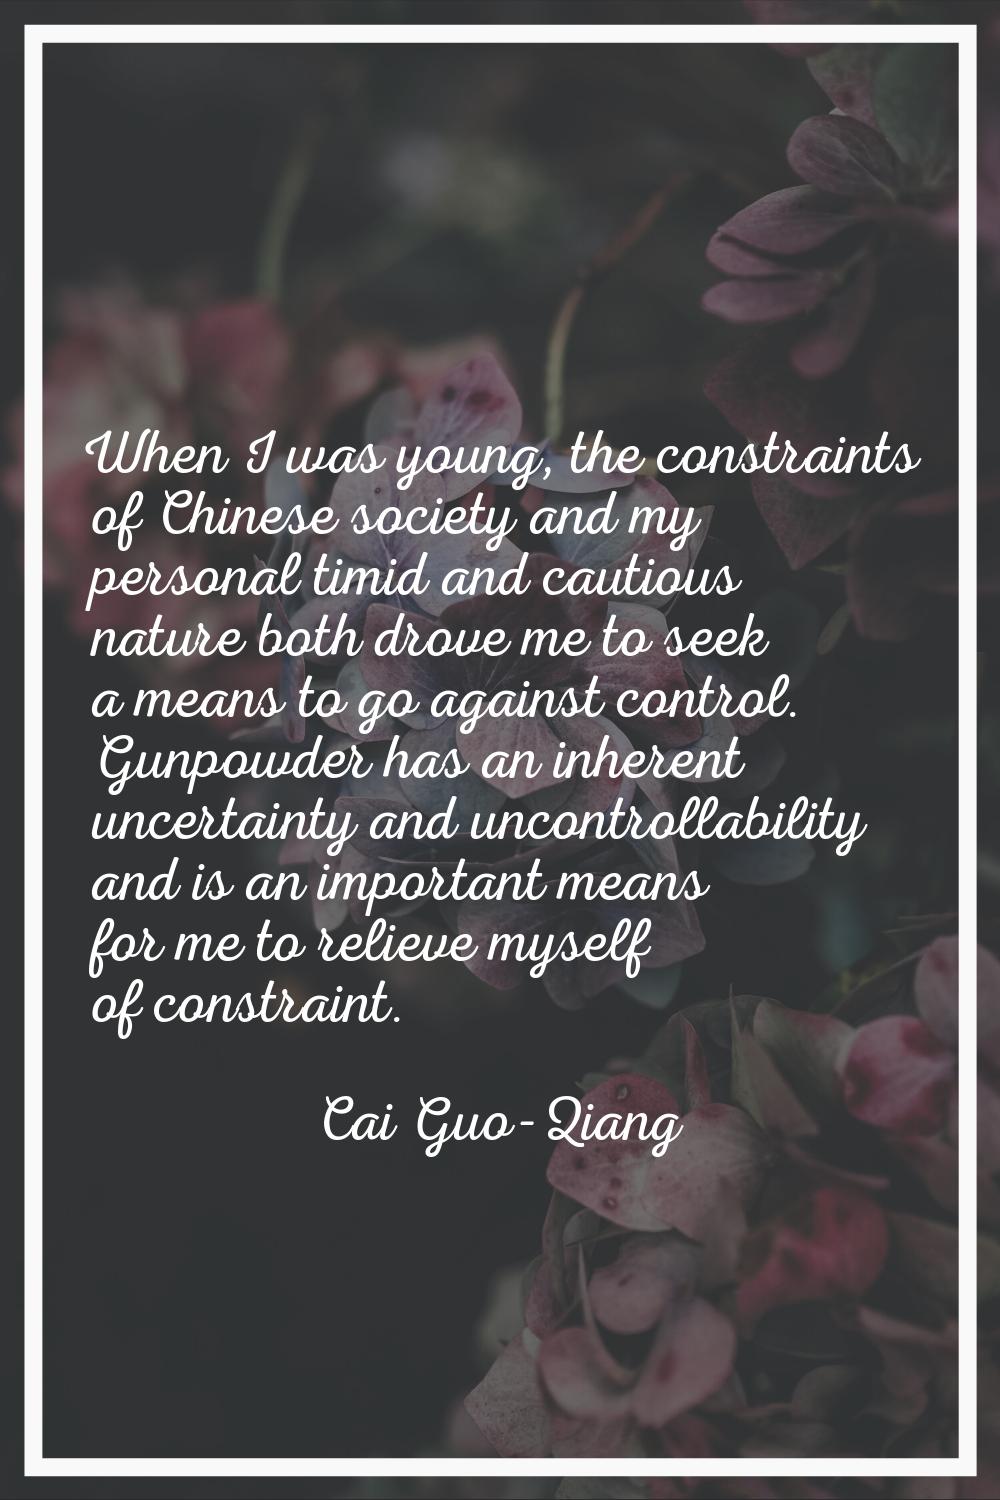 When I was young, the constraints of Chinese society and my personal timid and cautious nature both